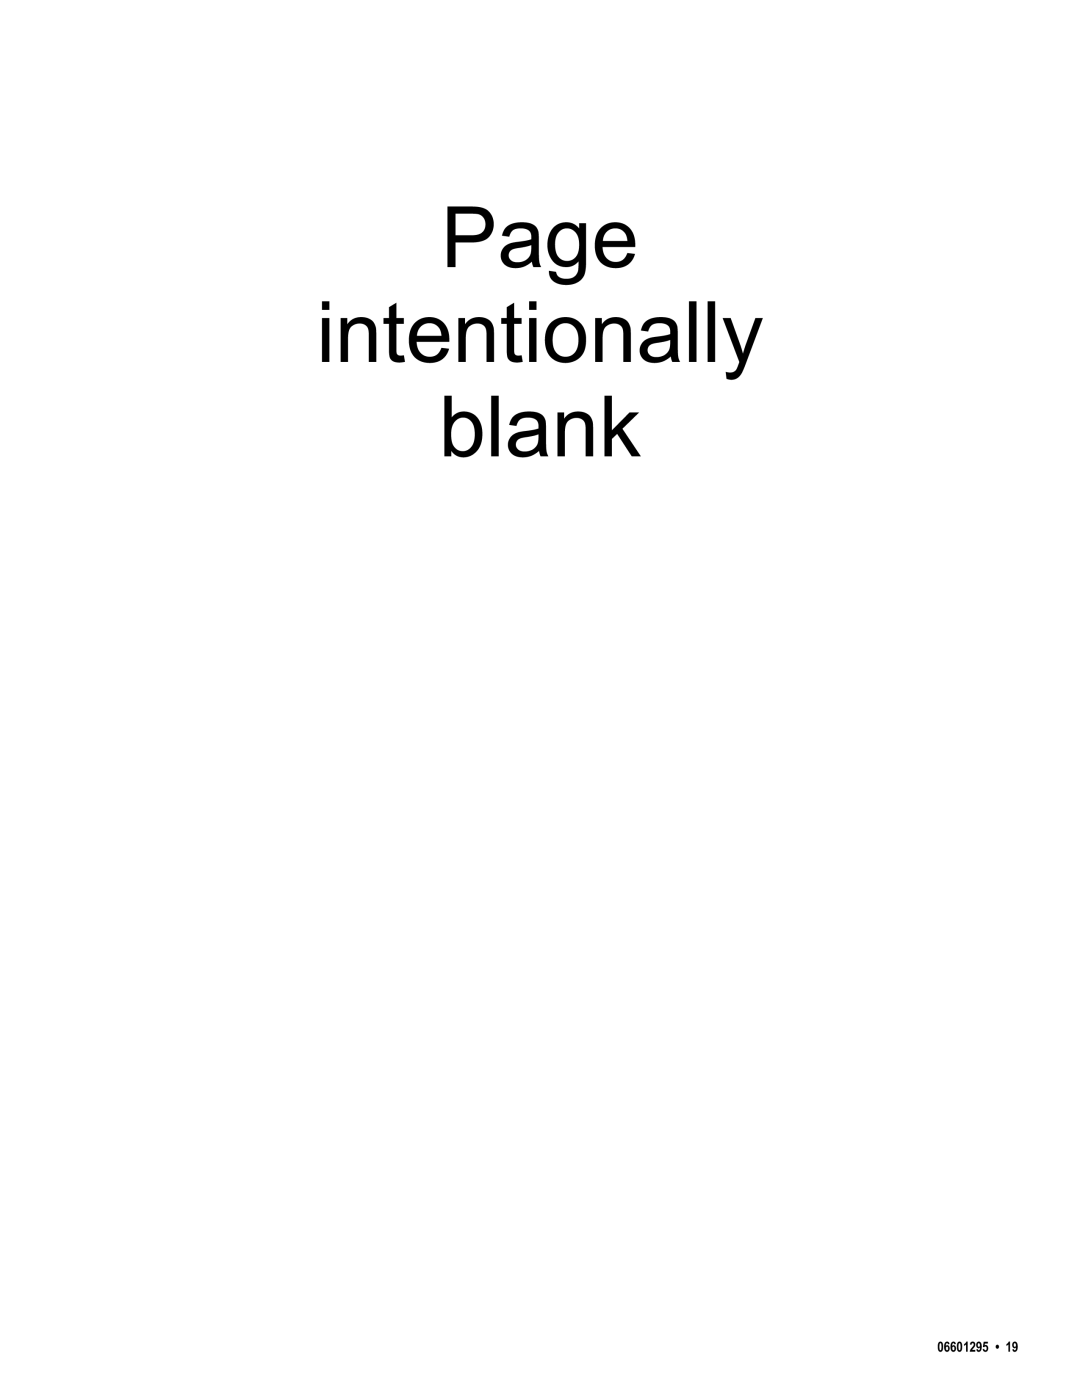 Char-Broil 06601295 manual Page intentionally blank 